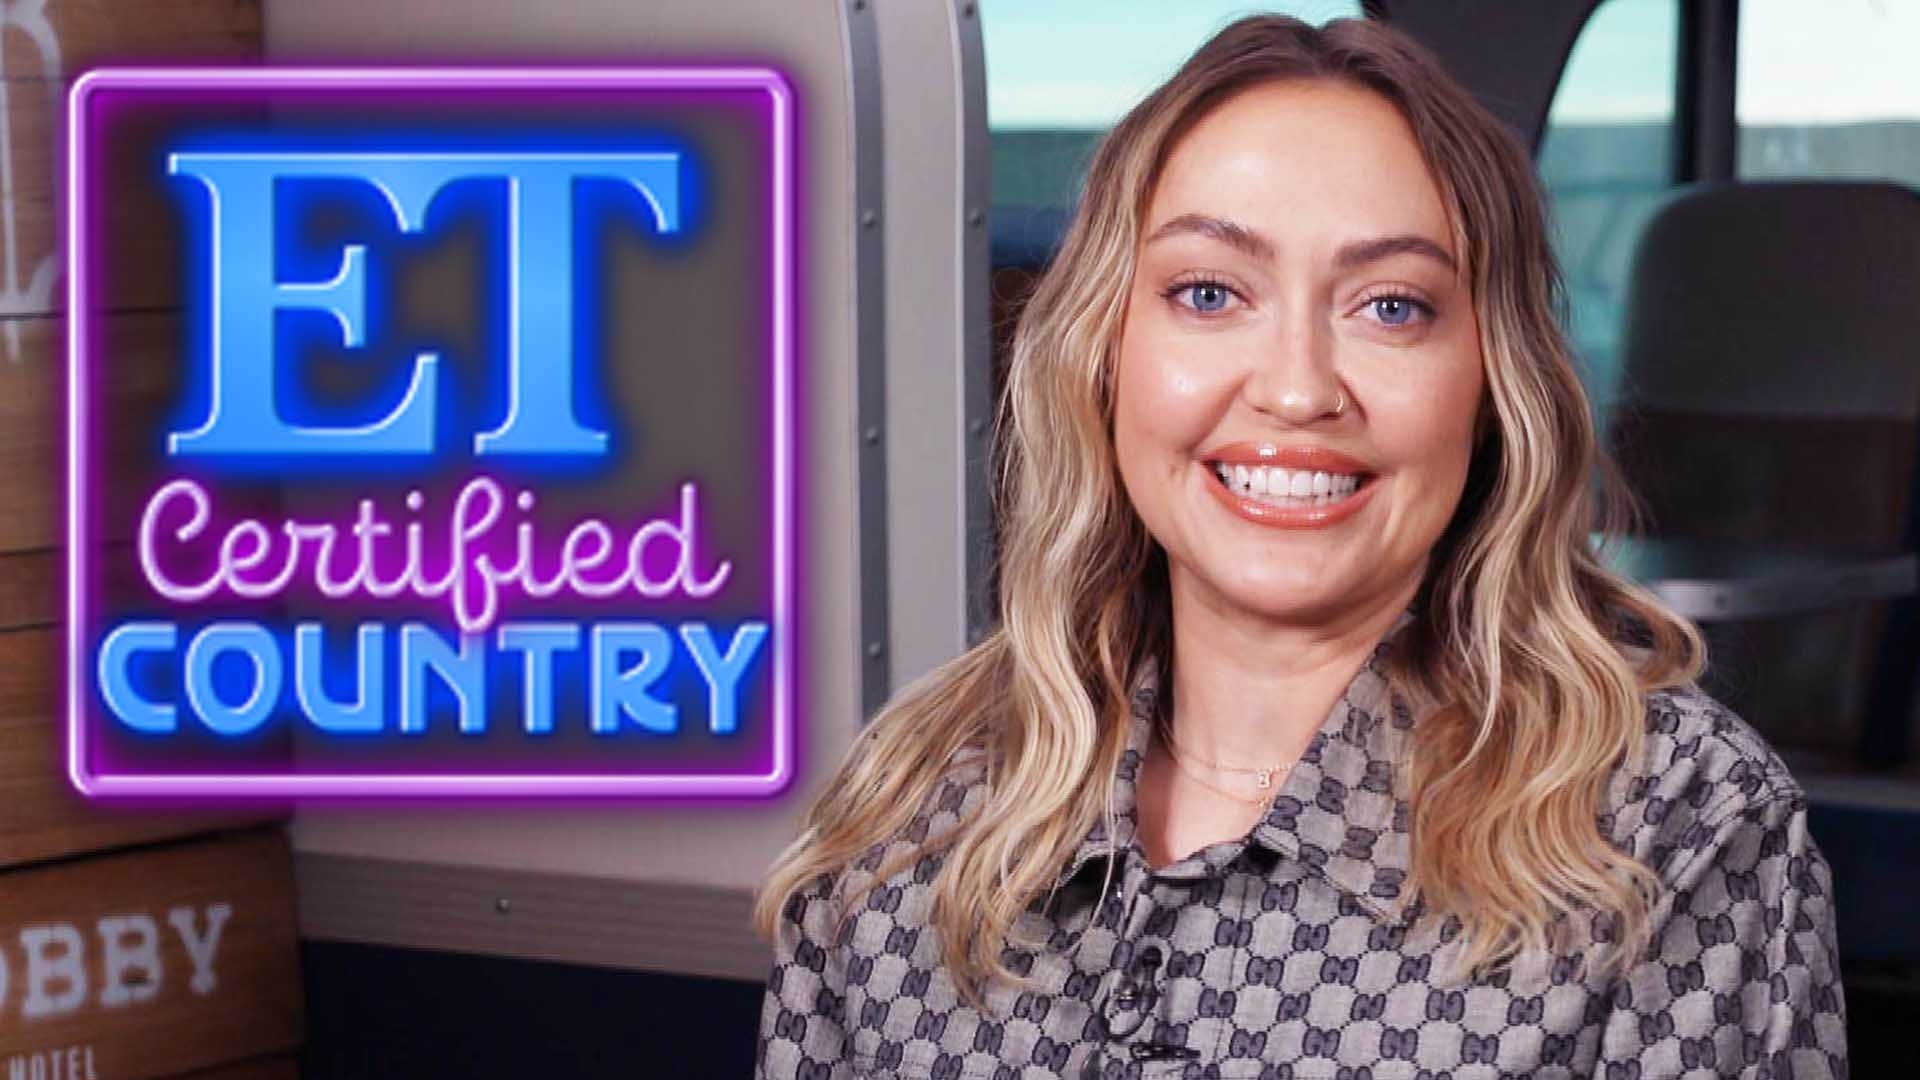 Brandi Cyrus Gushes Over Her Family's Hit Songs | Certified Country